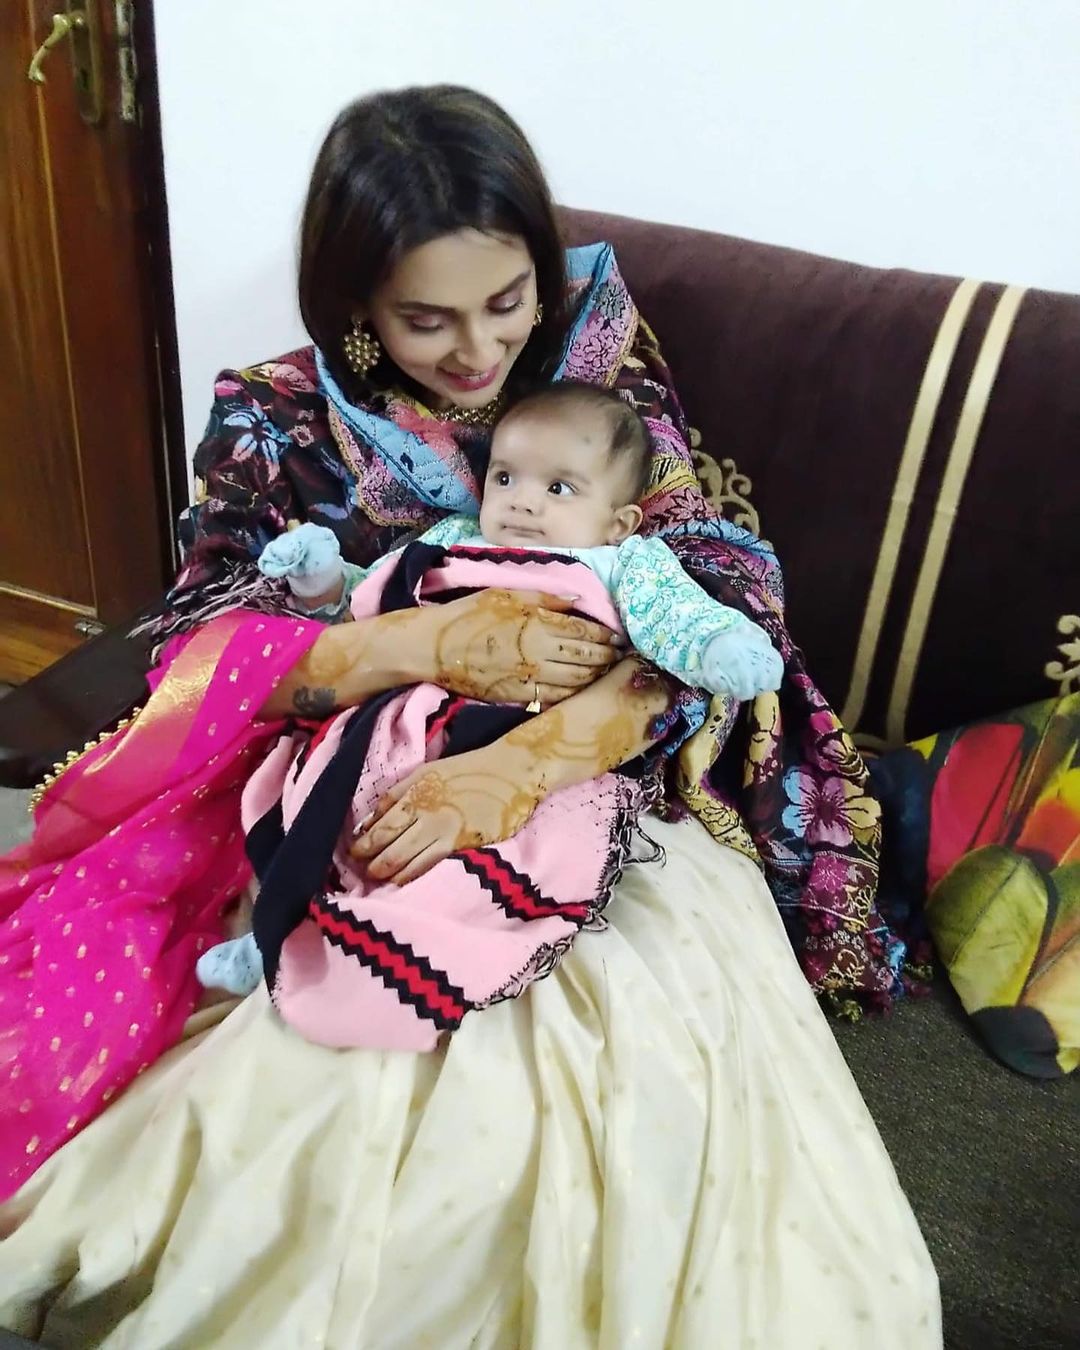 This little baby is the daughter of Mimi Chakraborty's sister